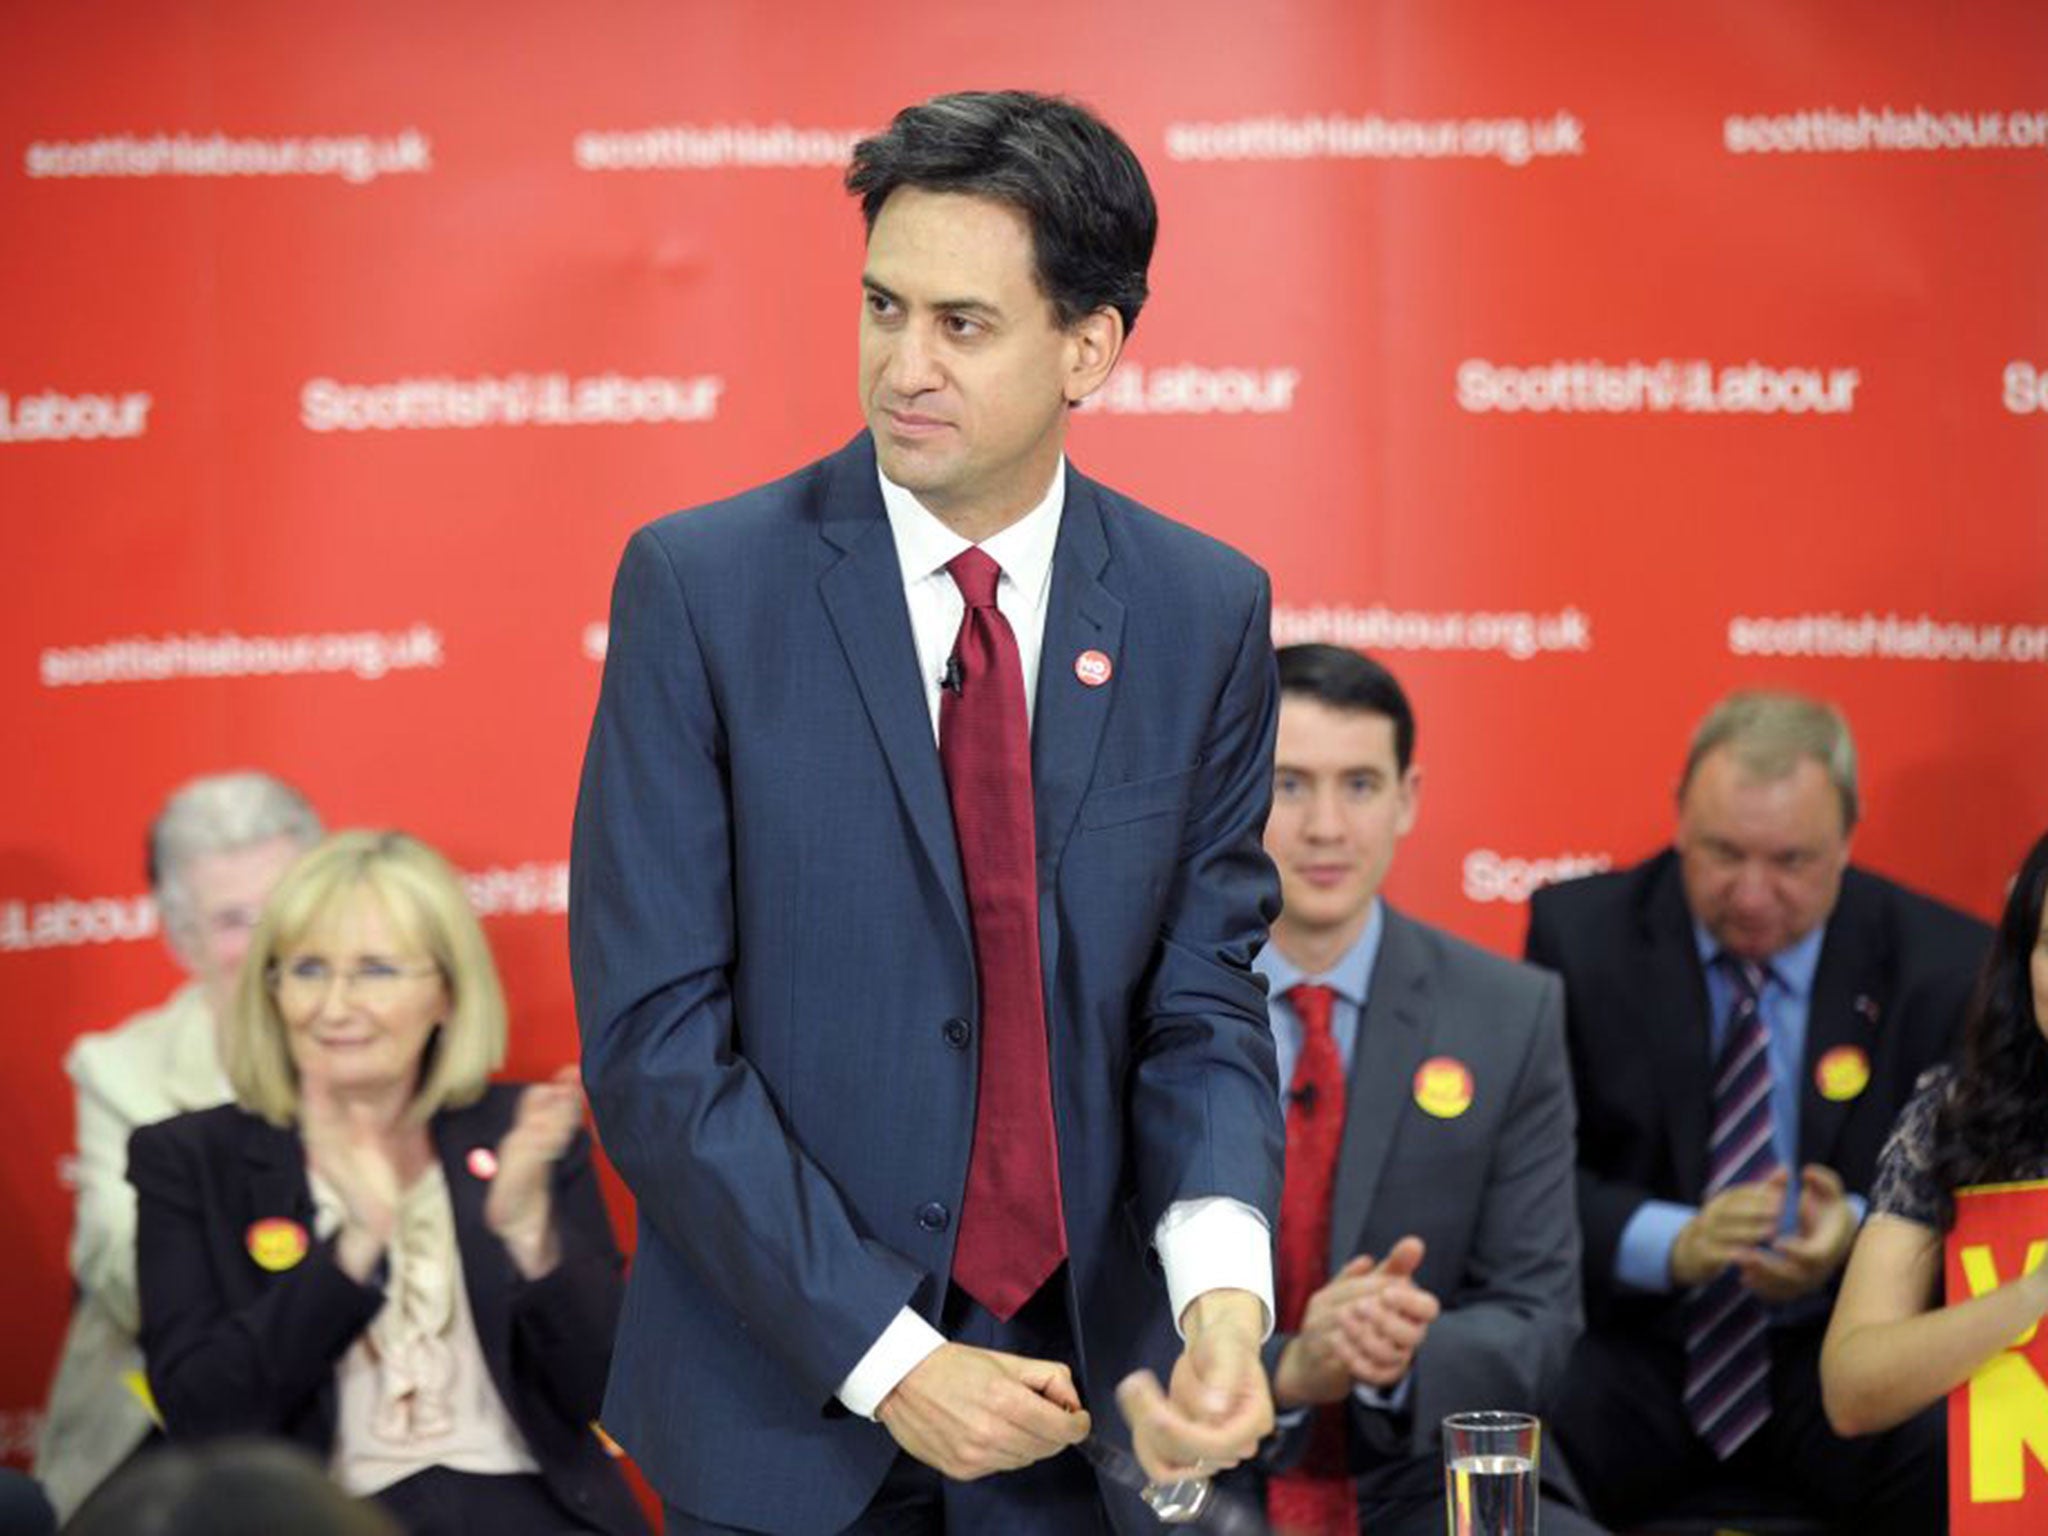 "Miliband has to play down some of the ideological differences to keep his party united"